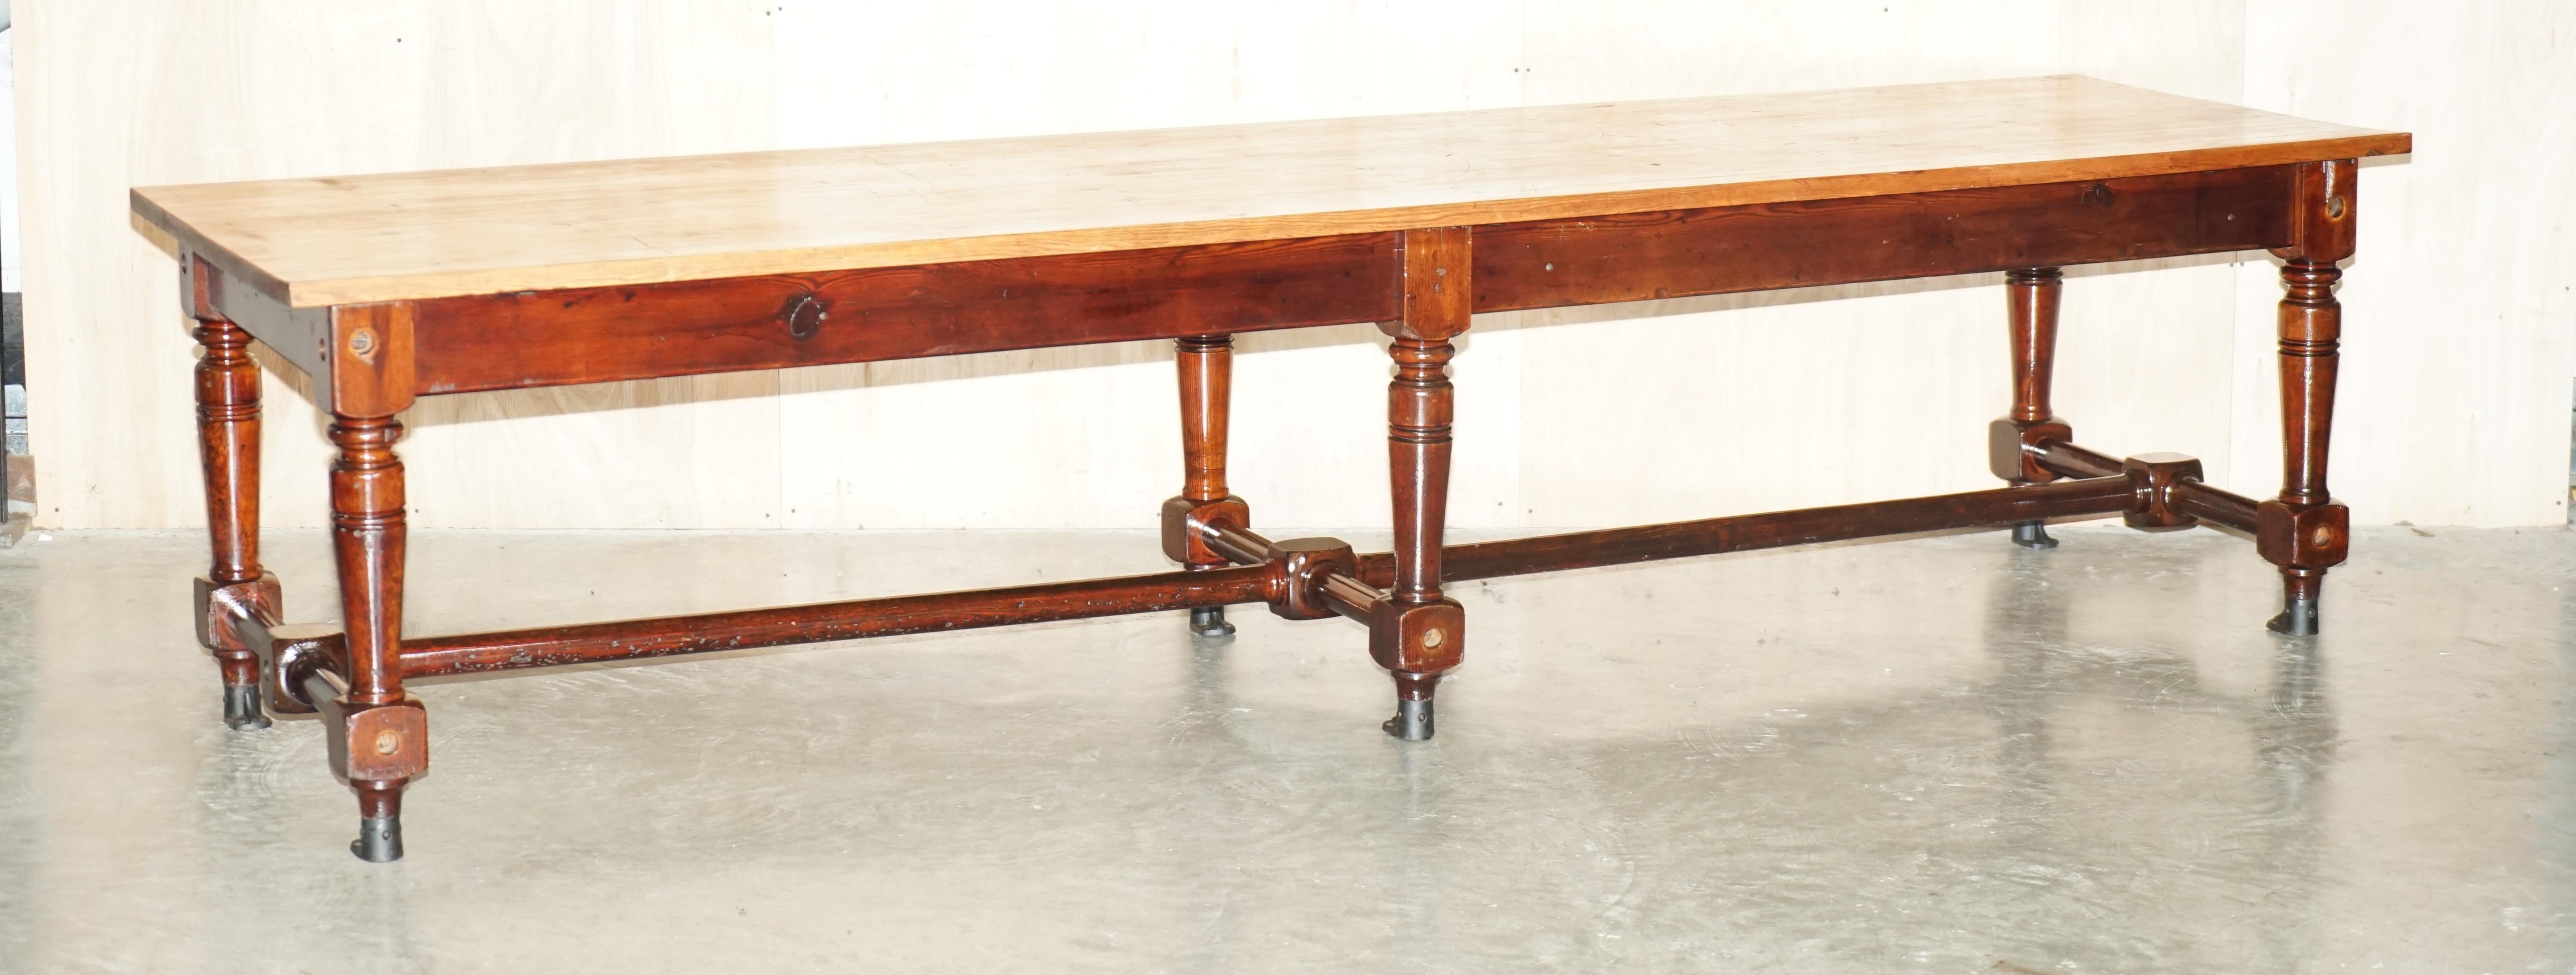 Victorian ER STAMPED CROWN ESTATE ViCTORIAN SHIPS REFECTORY DINING TABLE BRONZE FEEt For Sale